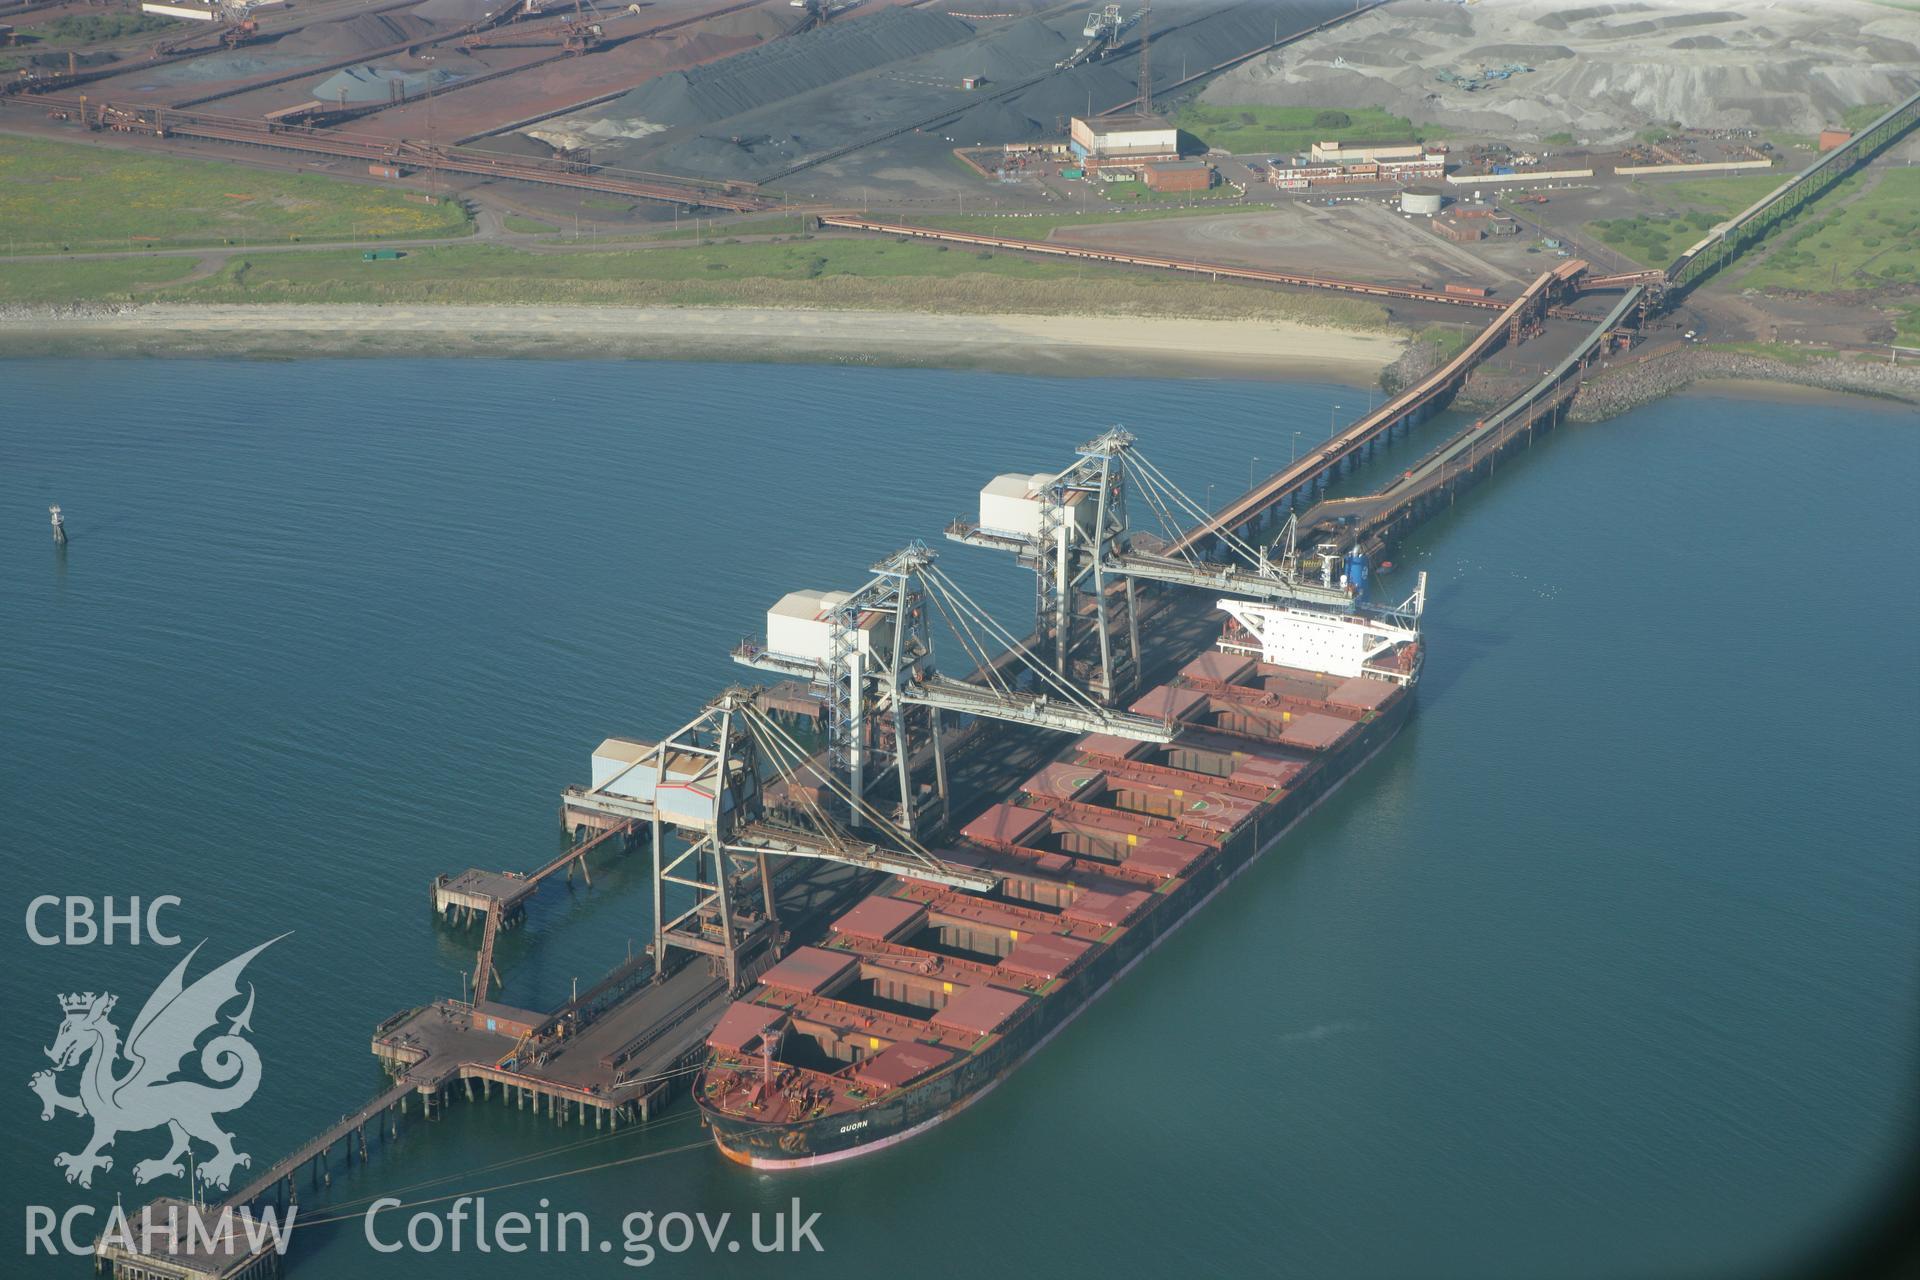 RCAHMW colour oblique photograph of Port Talbot Docks. Taken by Toby Driver on 24/05/2010.